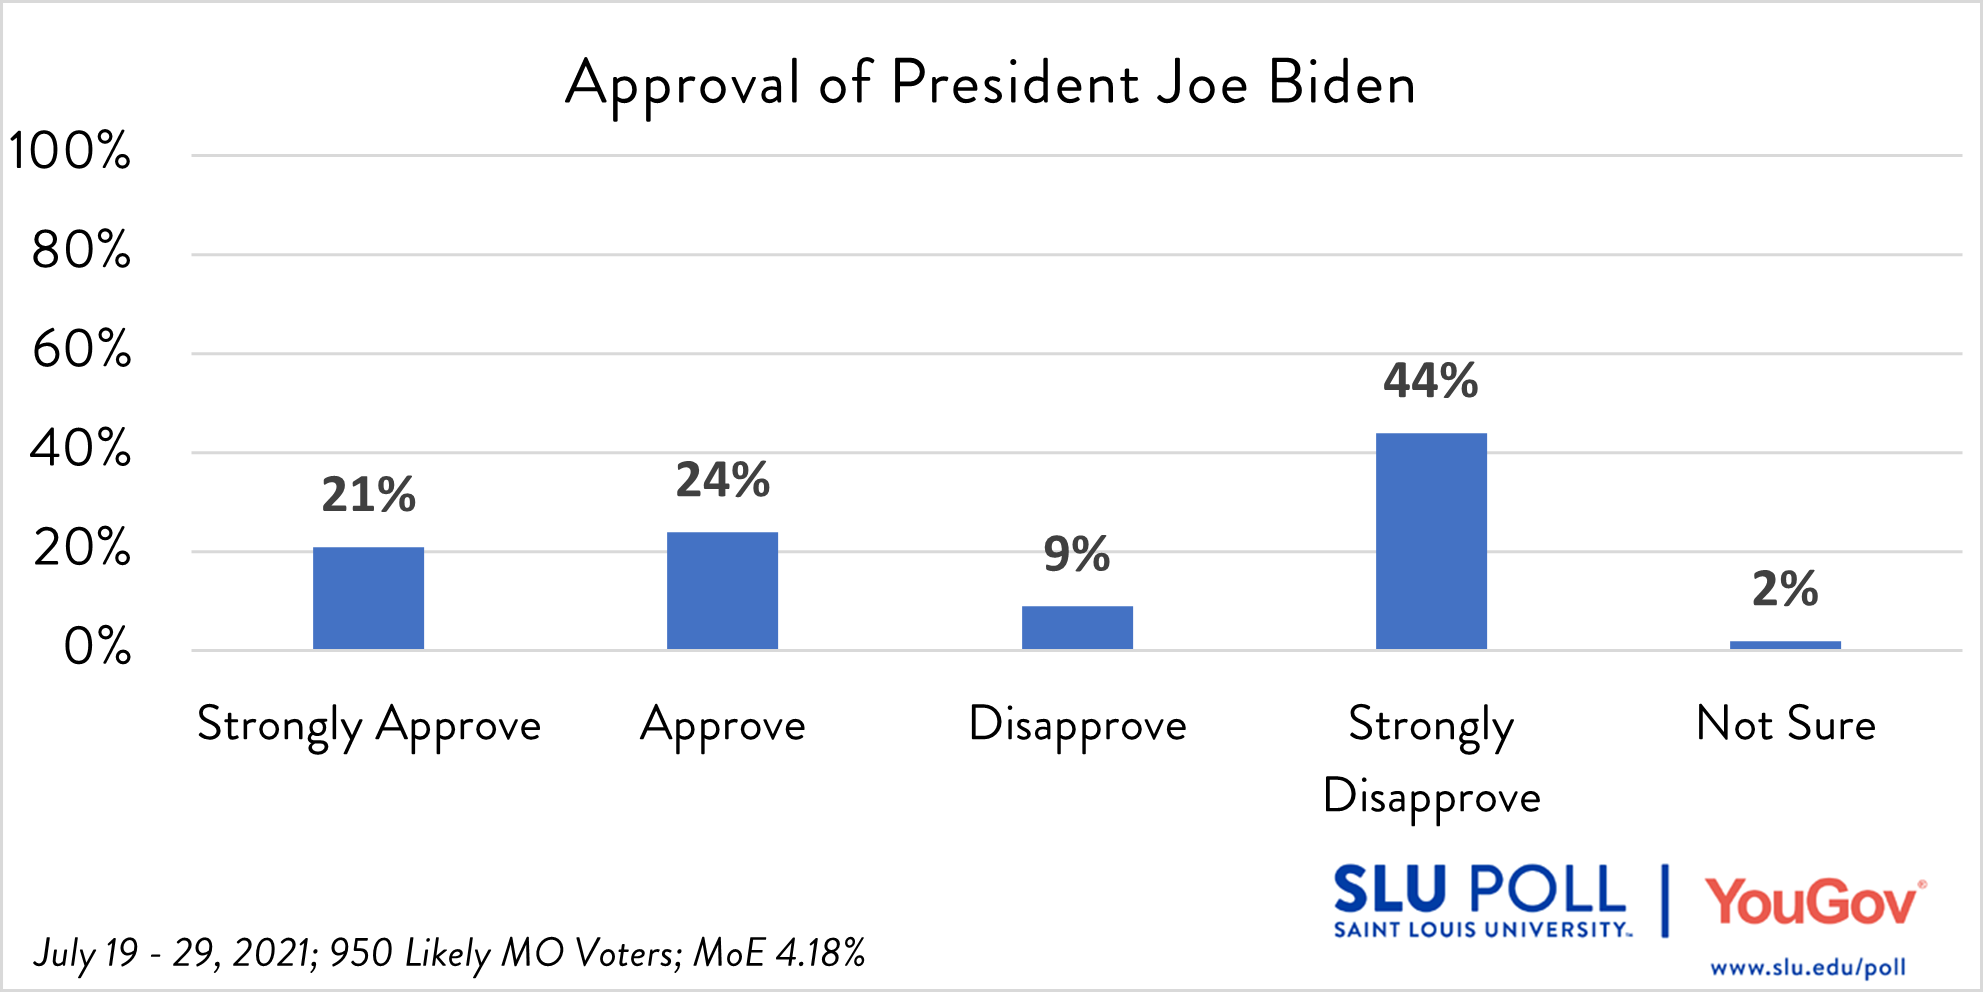 Do you approve or disapprove of the way each is doing their job… President Joe Biden?  - Strongly Approve: 21% - Approve: 24% - Disapprove: 9% - Strongly Disapprove: 44%  - Not Sure: 2%